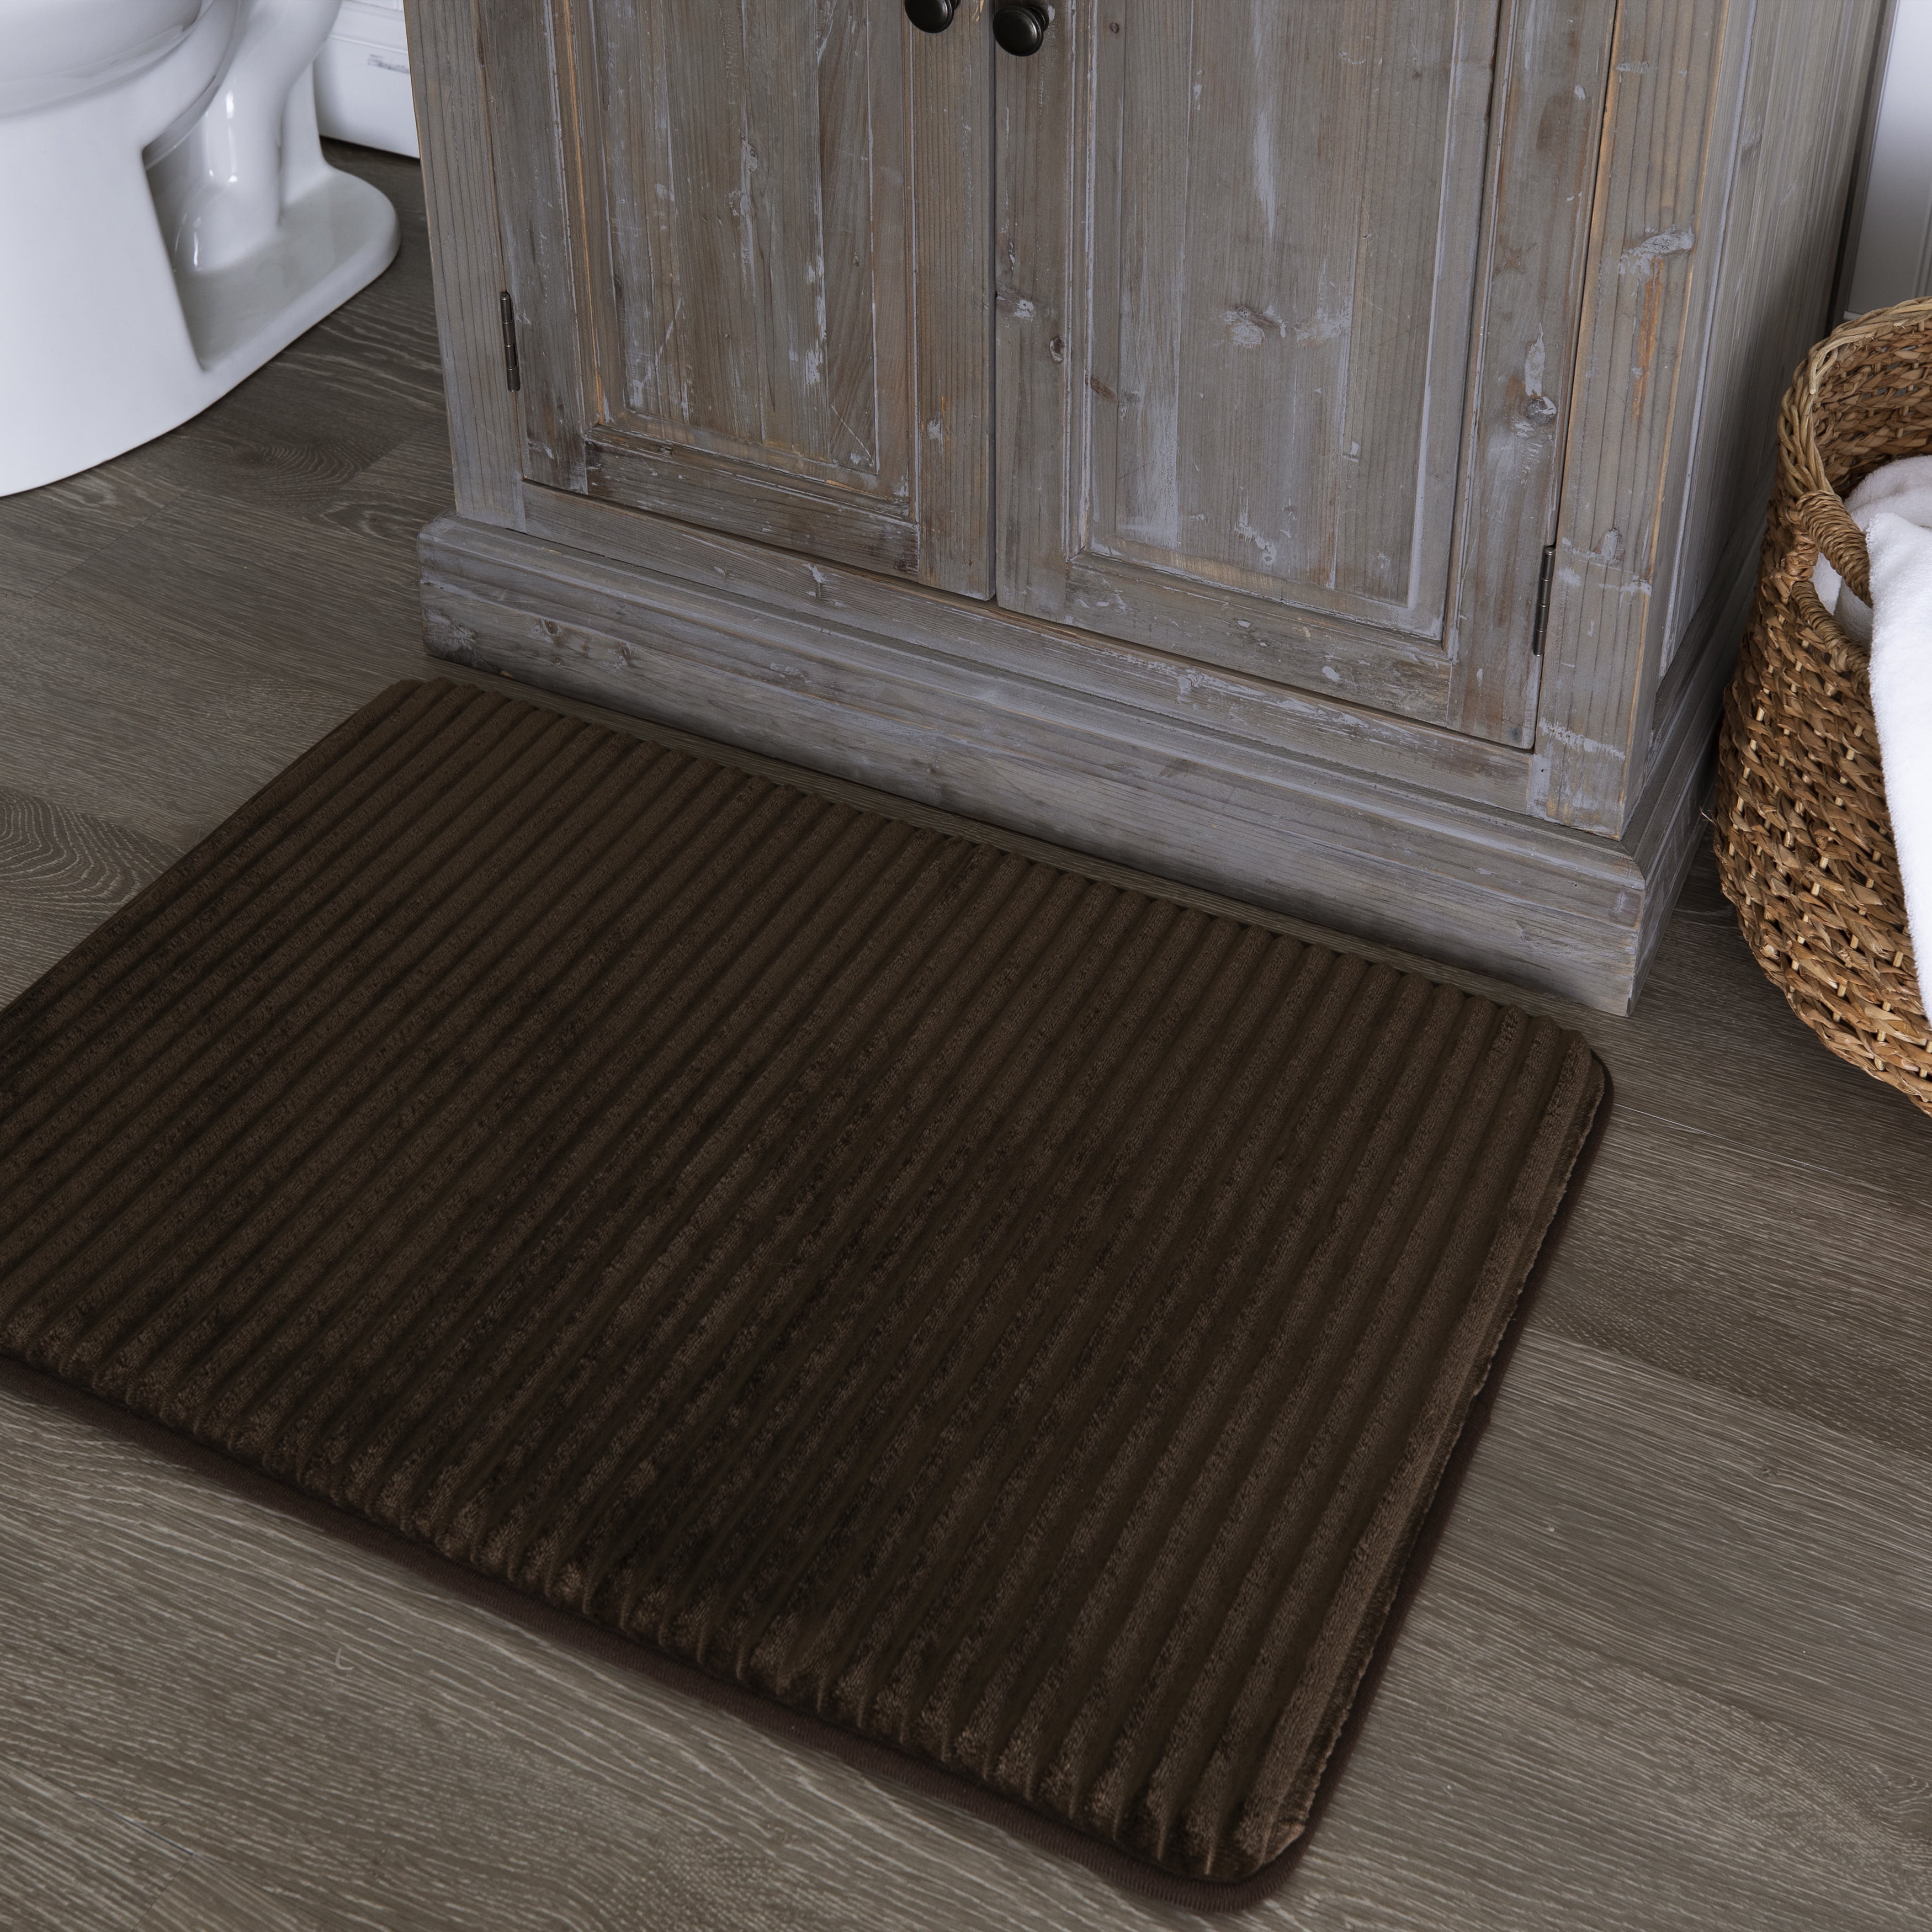 Mohawk Meory Foam Bath Rug Quick Dry 18X27 Inches Brown 